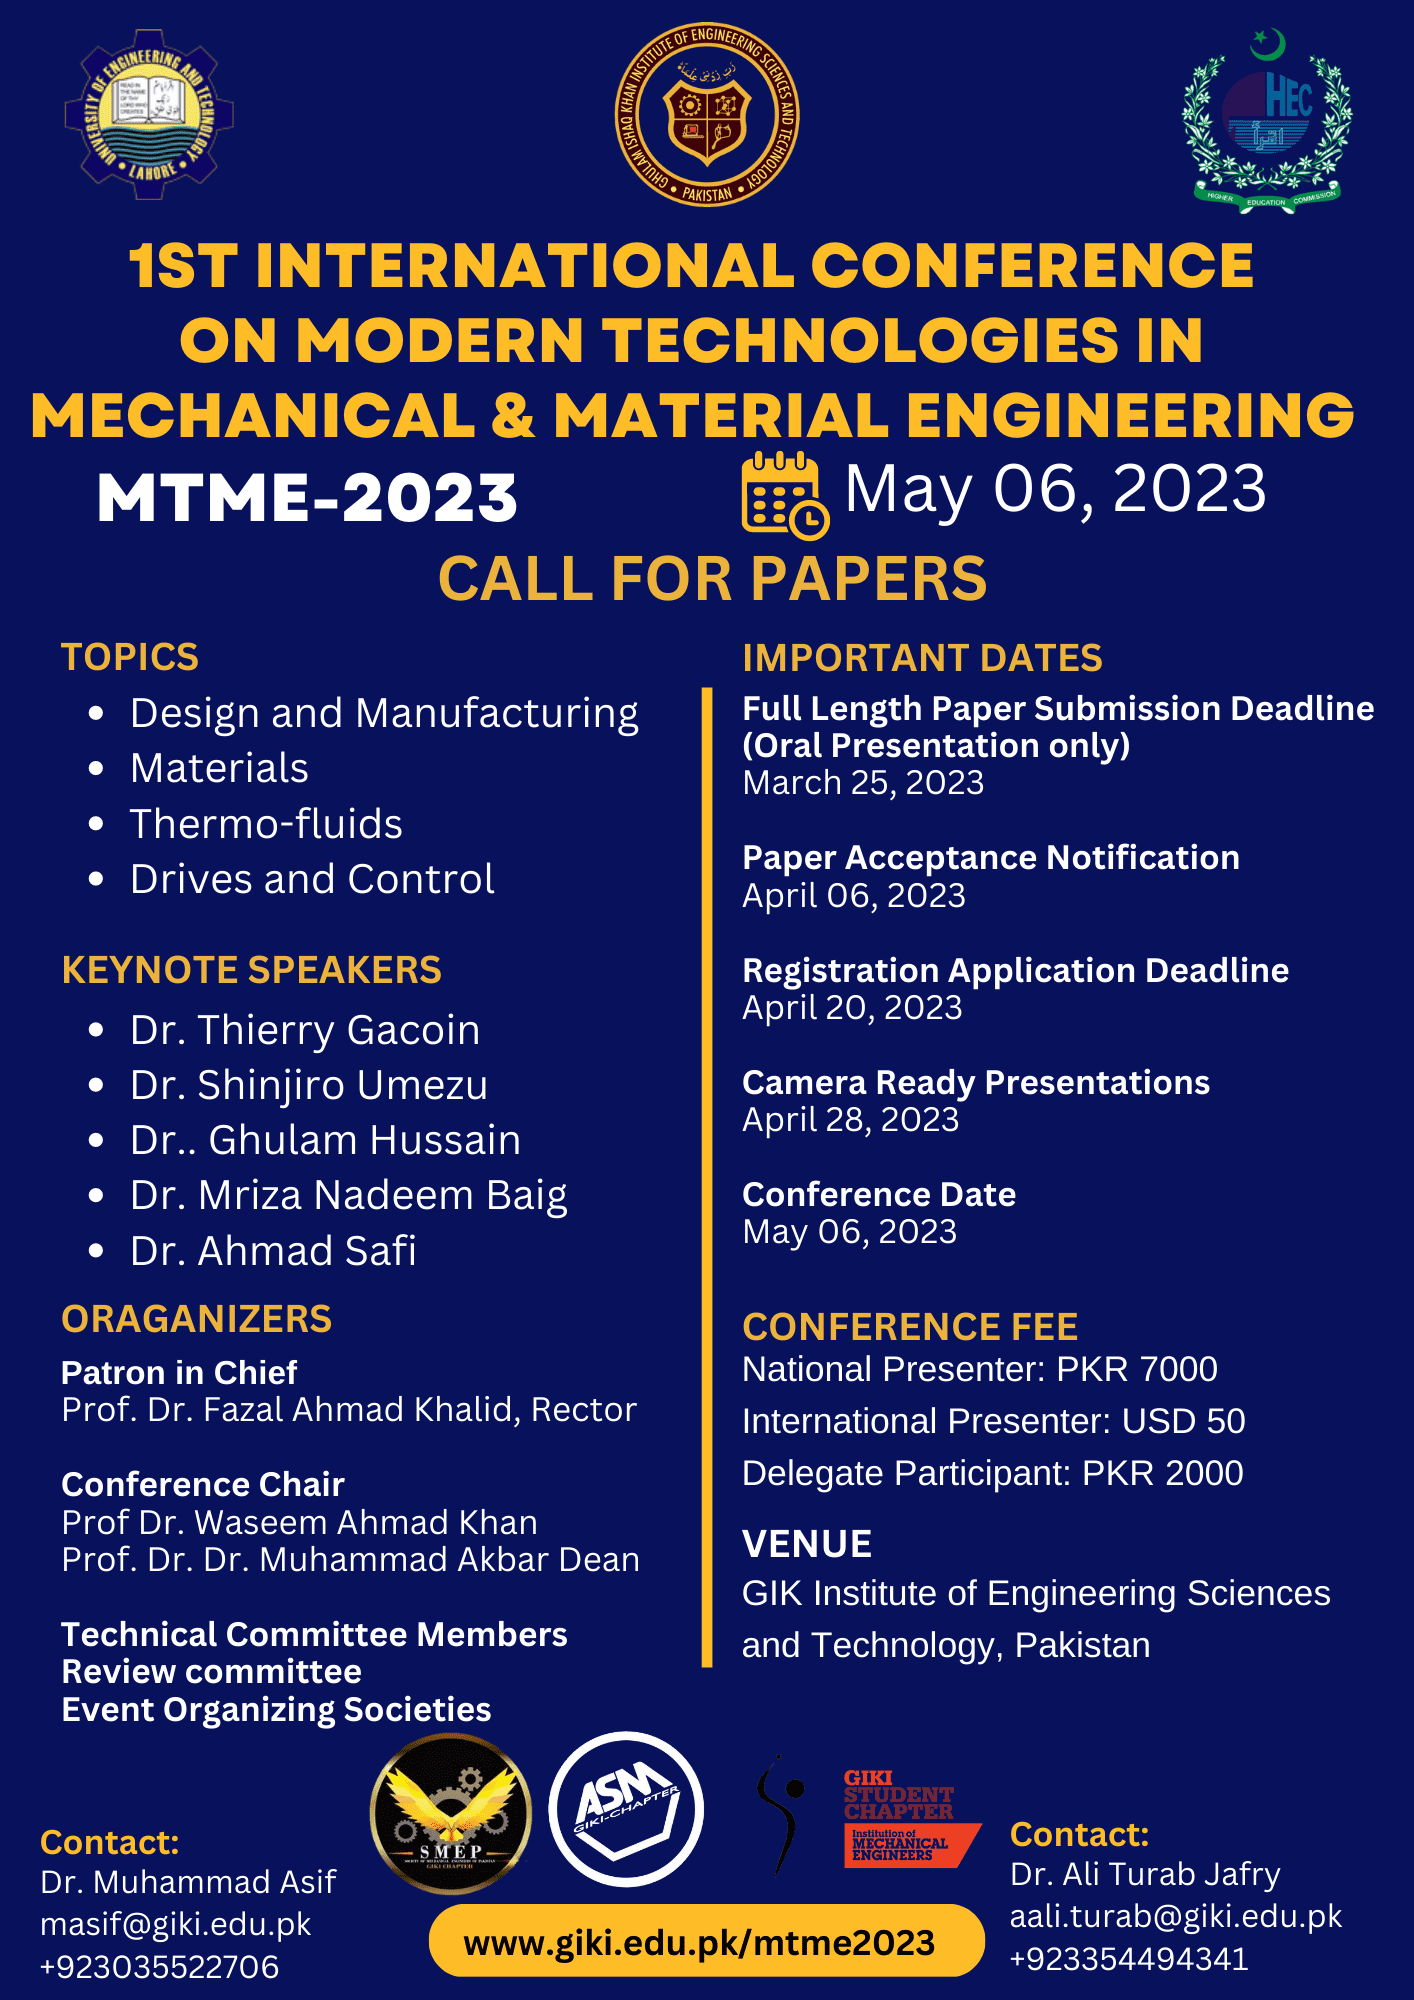 1st International Conference on Modern Technologies in Mechanical